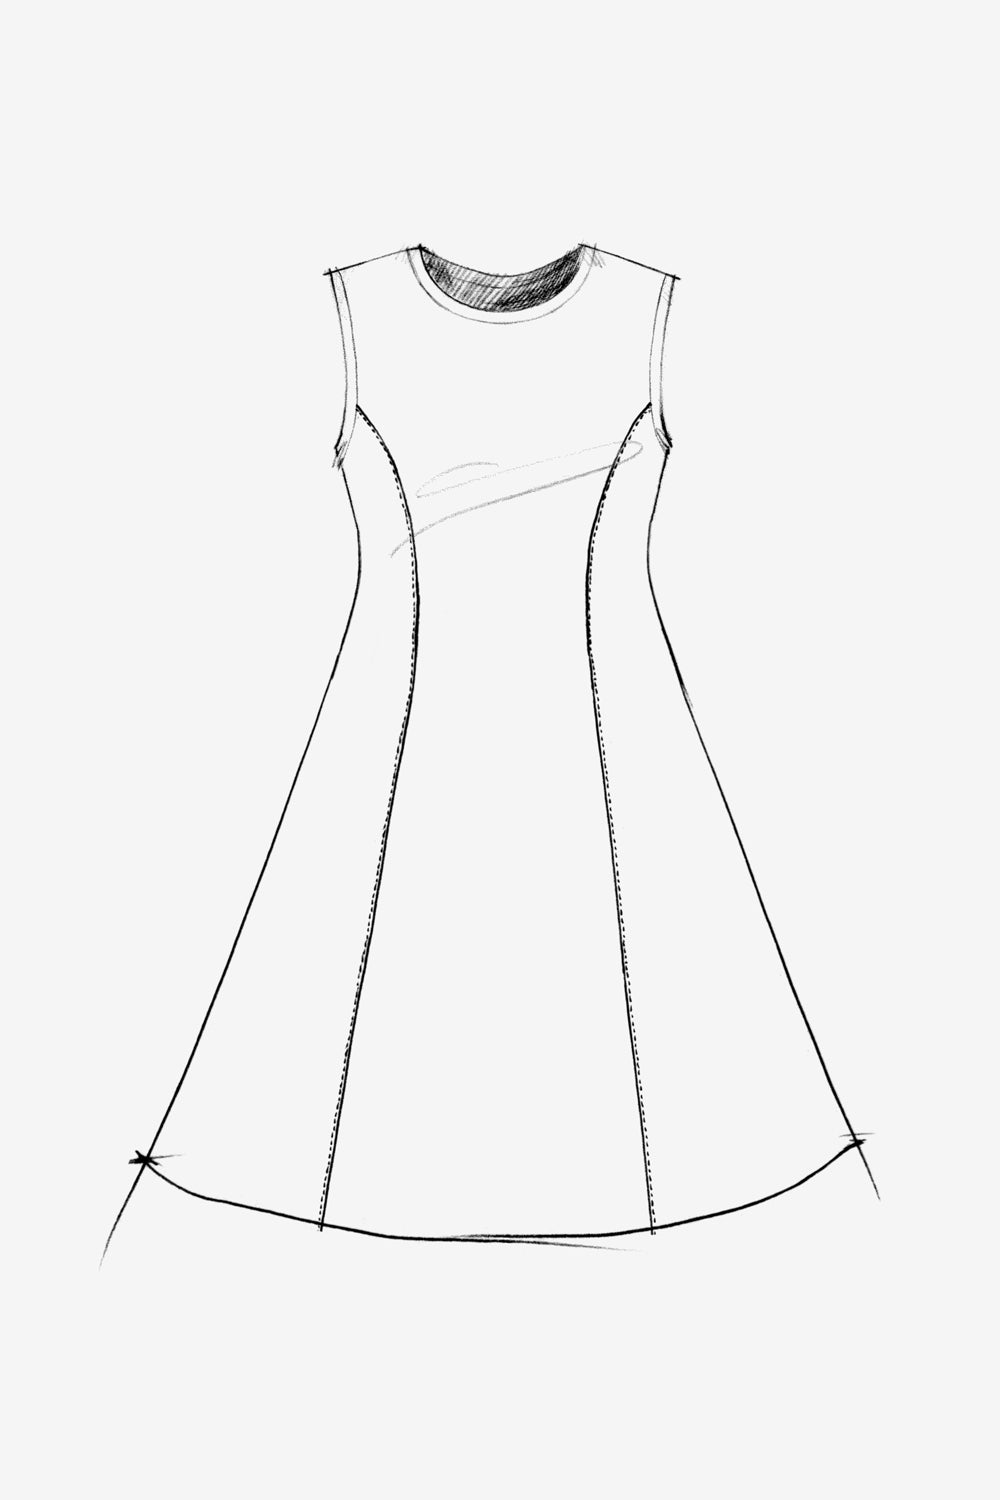 The School of Making Factory Dress Illustration